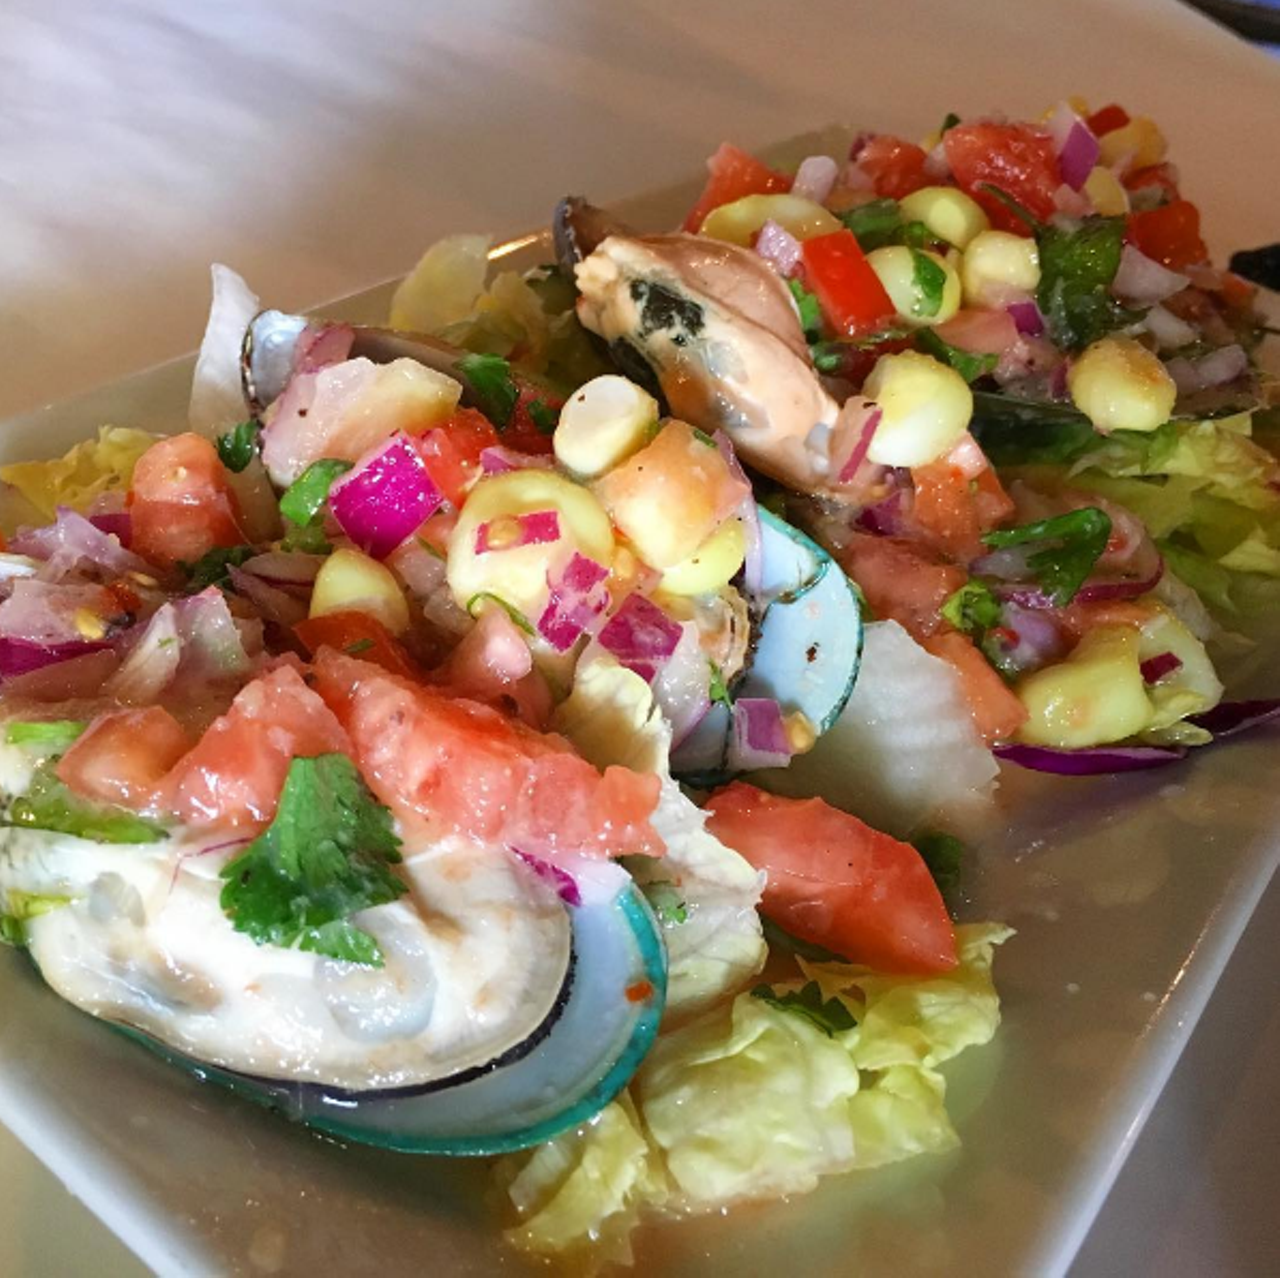 Choros a la chalaca from El Inka Grill
7600 Dr. Phillips Blvd., 407-930-2810
You&#146;ve had Peruvian-style ceviche, so now give these steamed mussels on the half shell a try. They&#146;re topped with red onion, spicy rocoto pepper, fresh herbs, lime juice and giant corn kernels called choclo. 
Photo via jasonperlow/Instagram